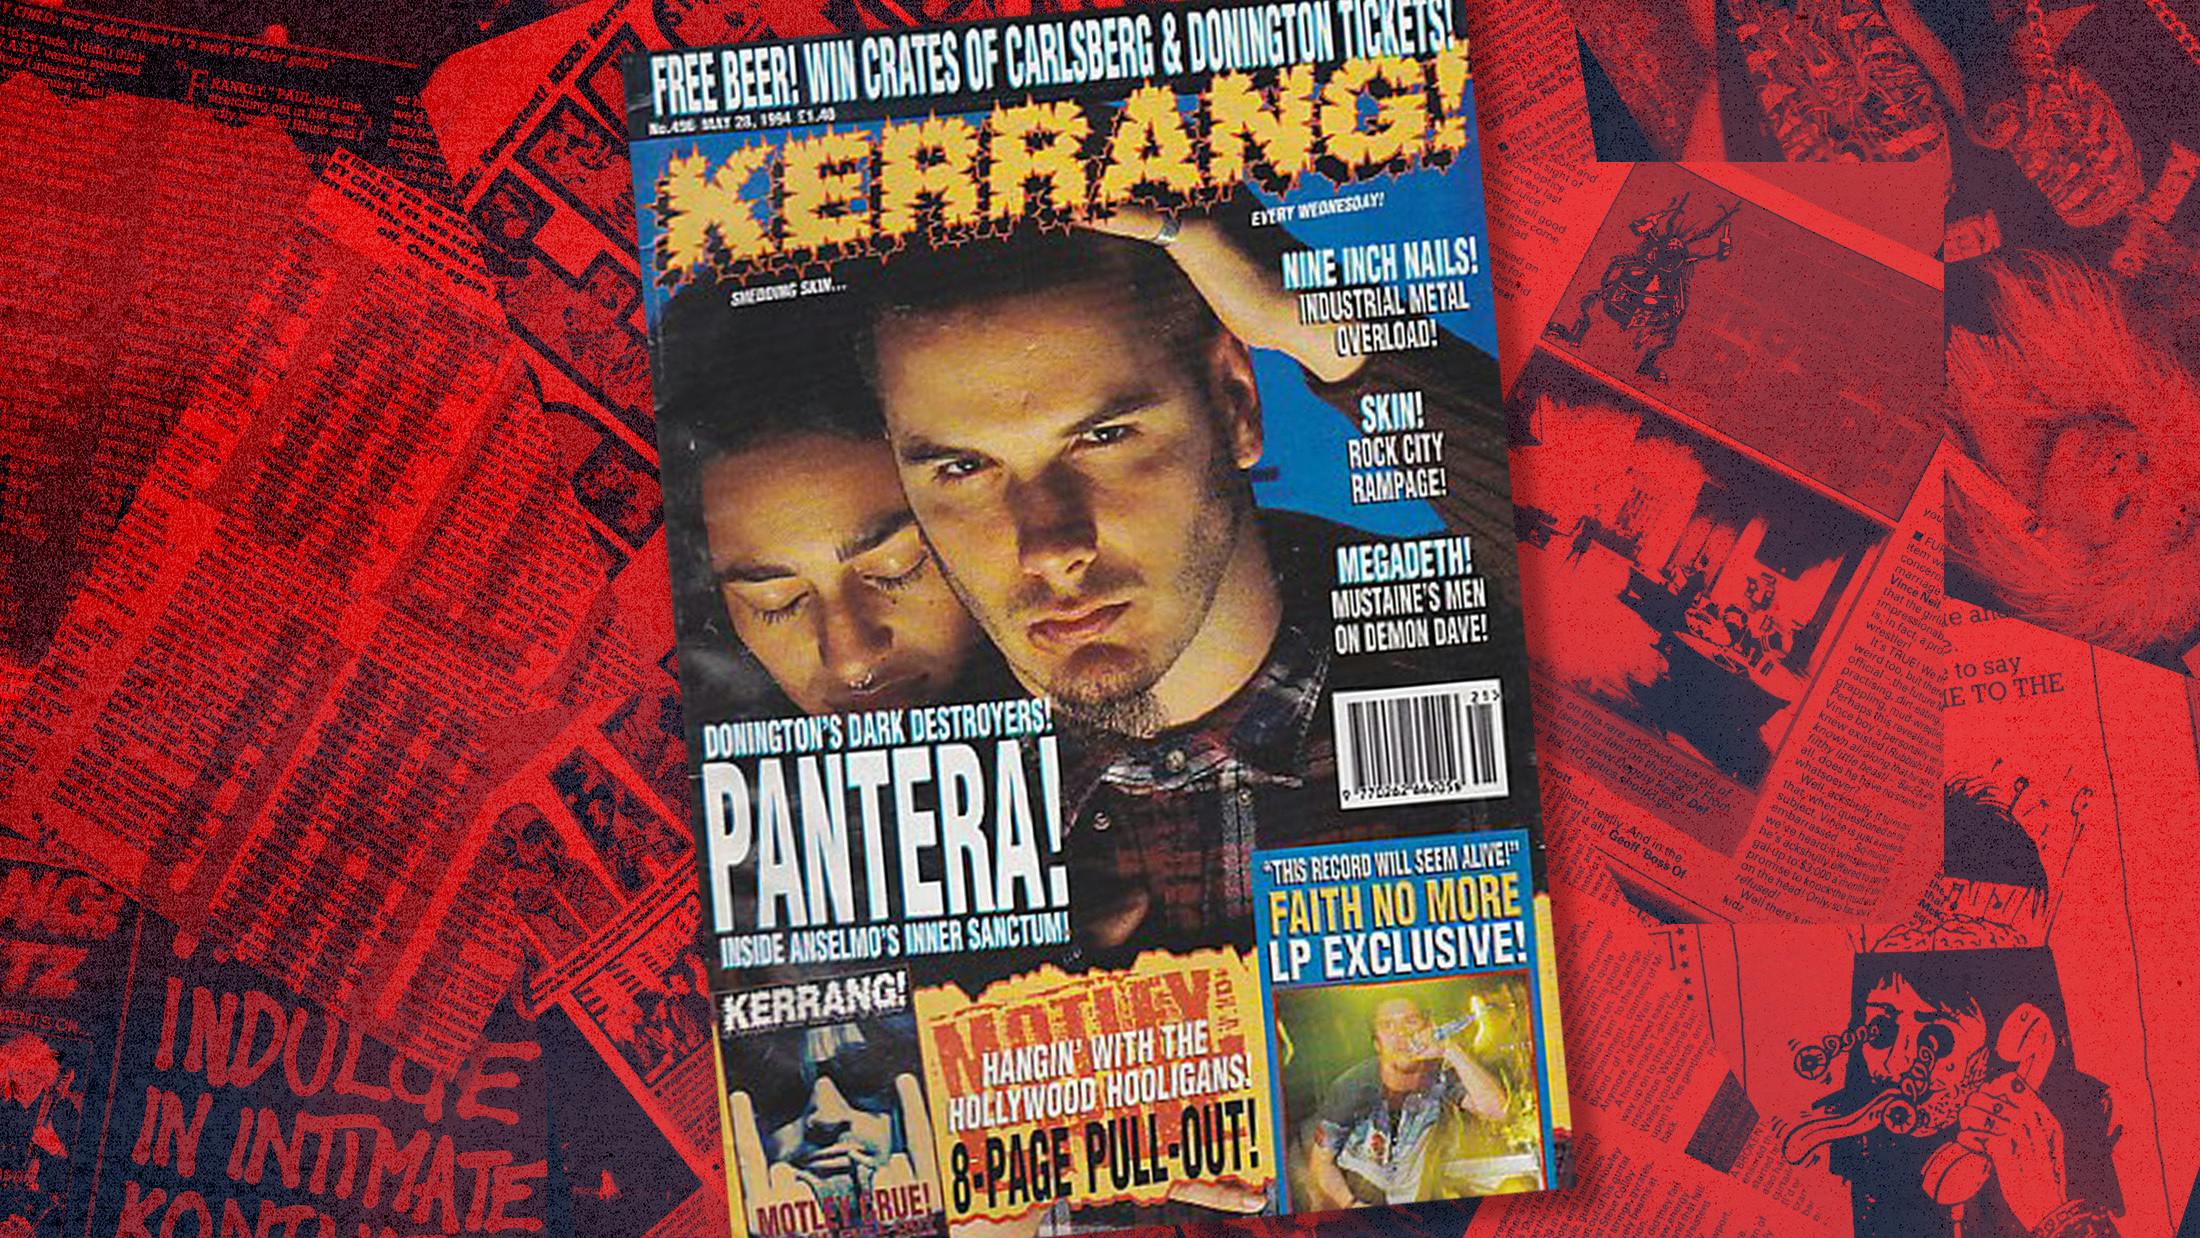 This Week In Kerrang! History: Issue 496, May 28, 1994